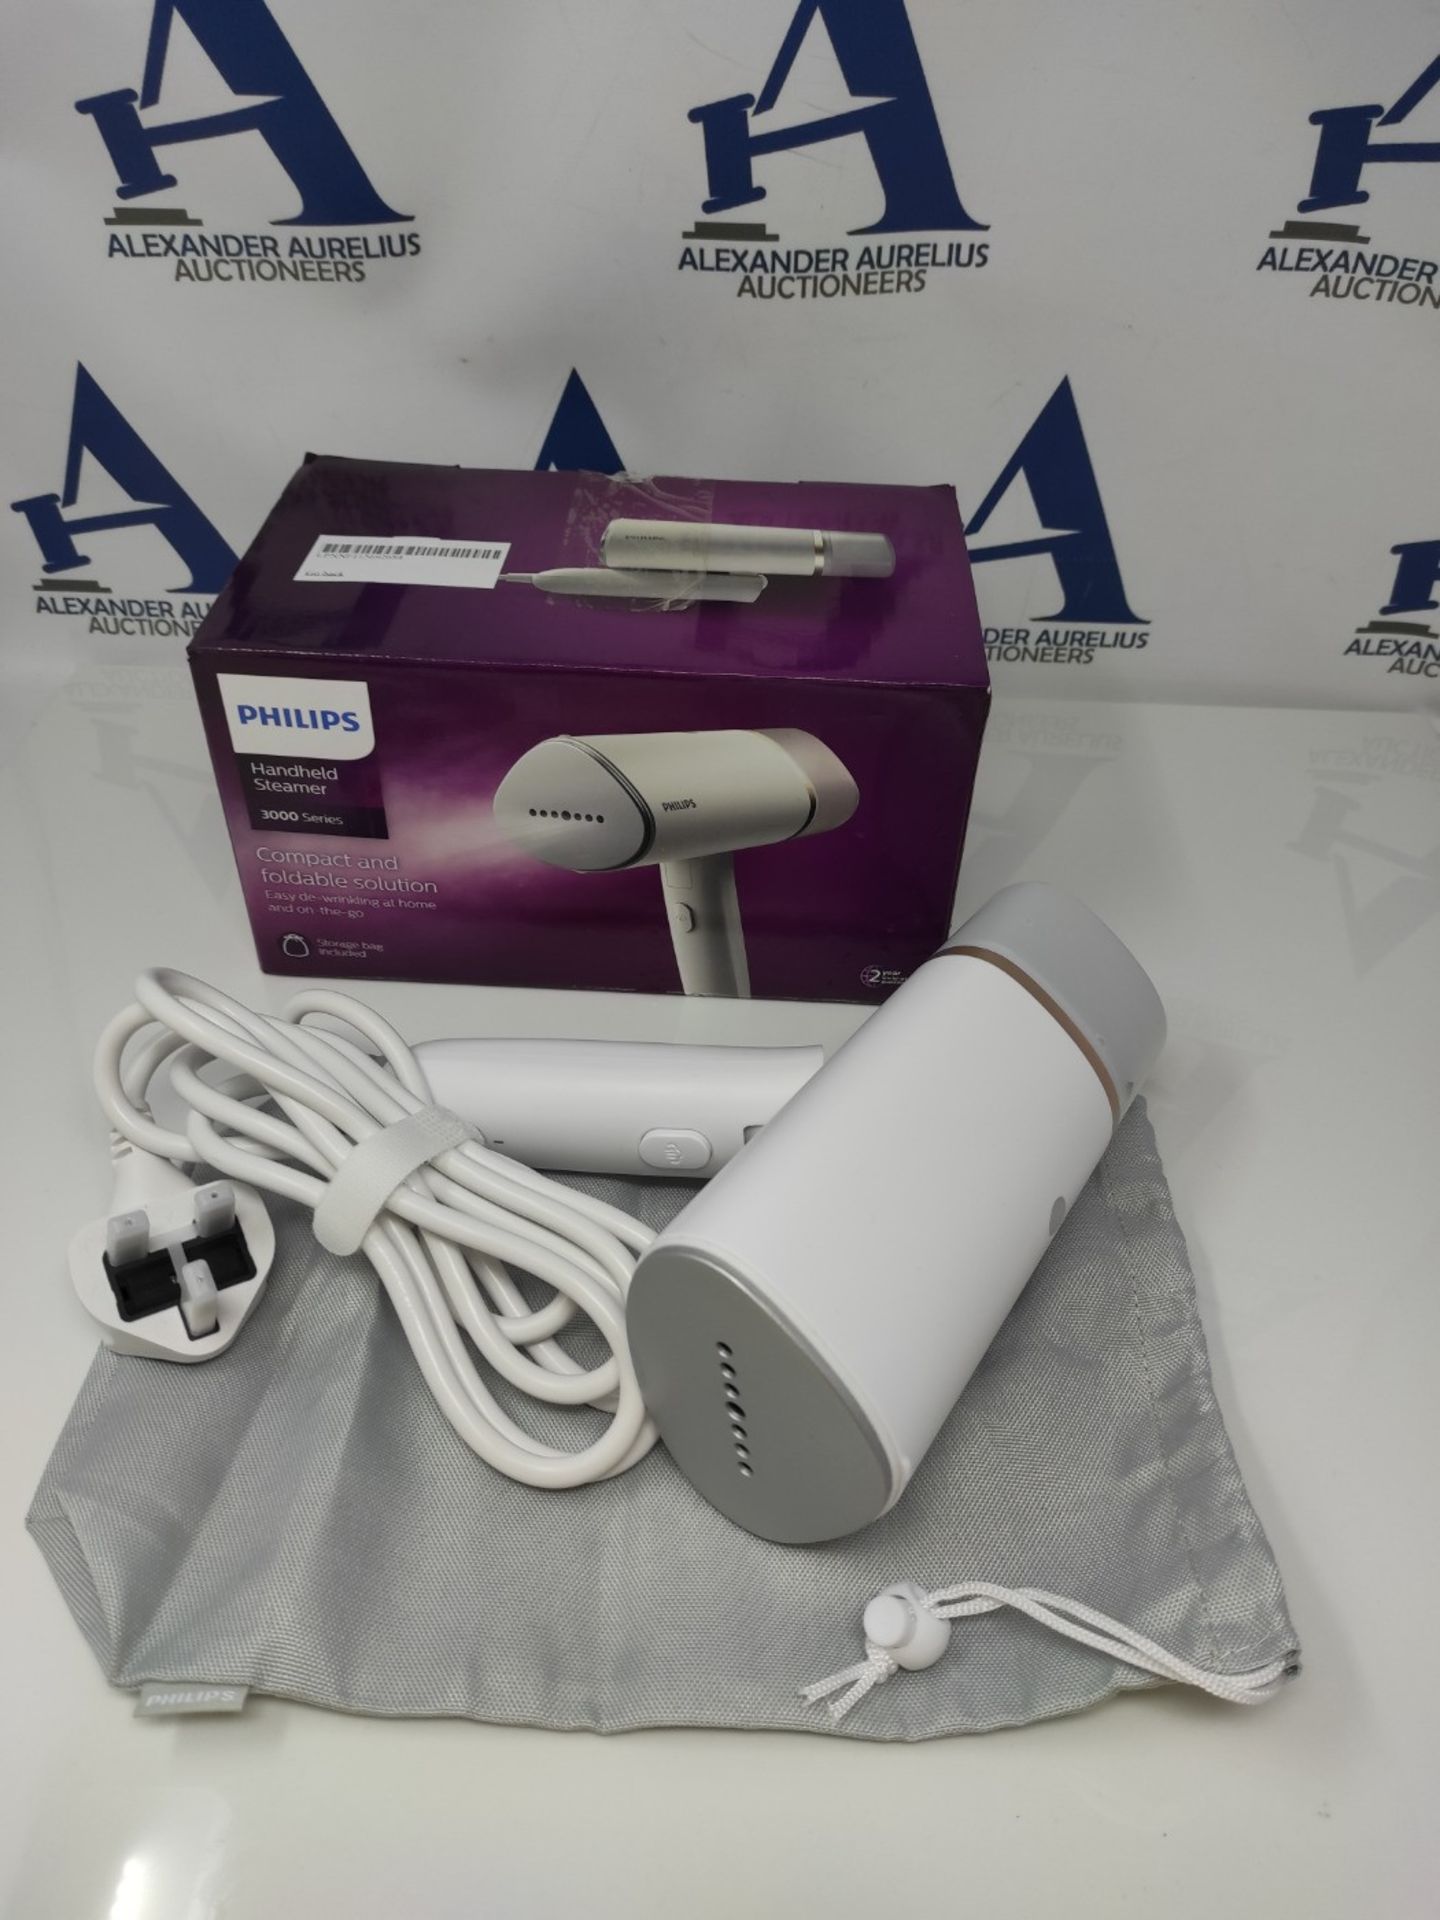 Philips Handheld Steamer 3000 Series, Compact and Foldable, Ready to Use in Ü30 Secon - Image 2 of 2